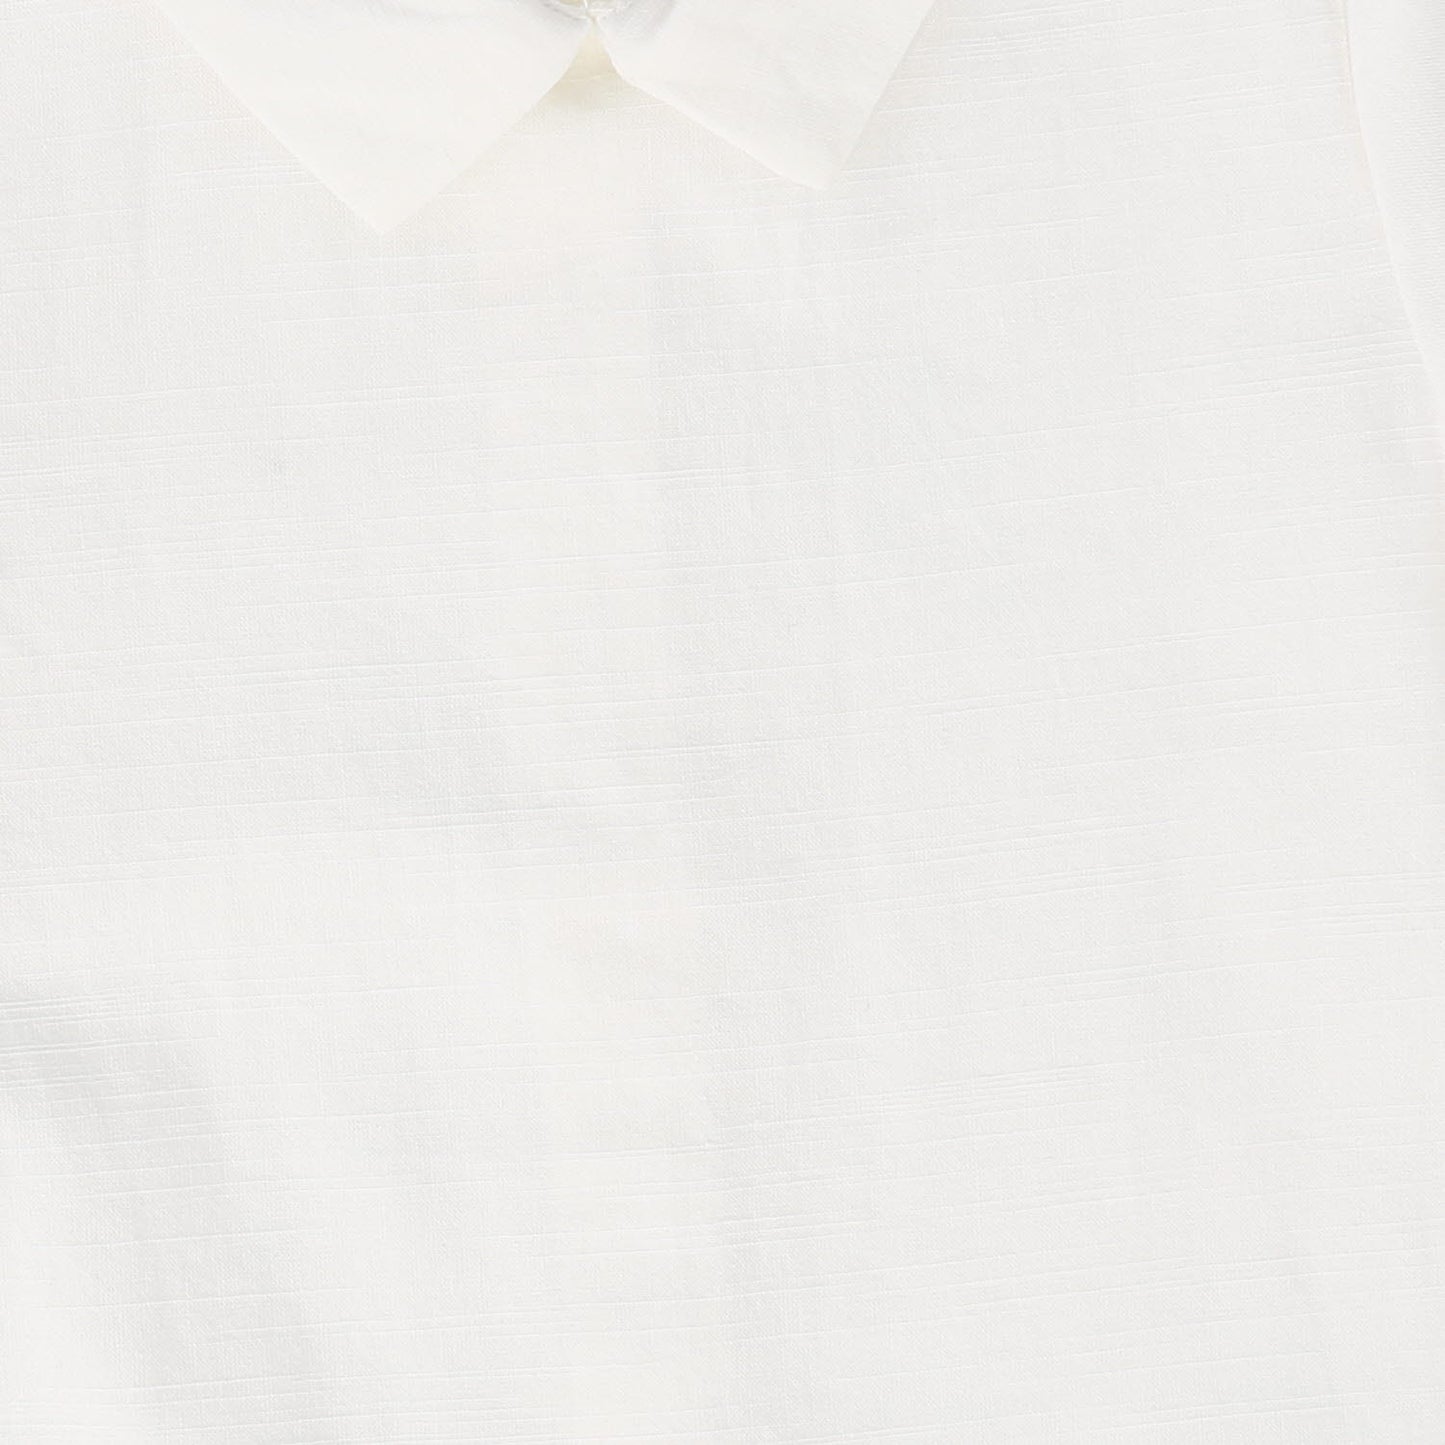 BACE COLLECTION WHITE COLLAR SHIRT